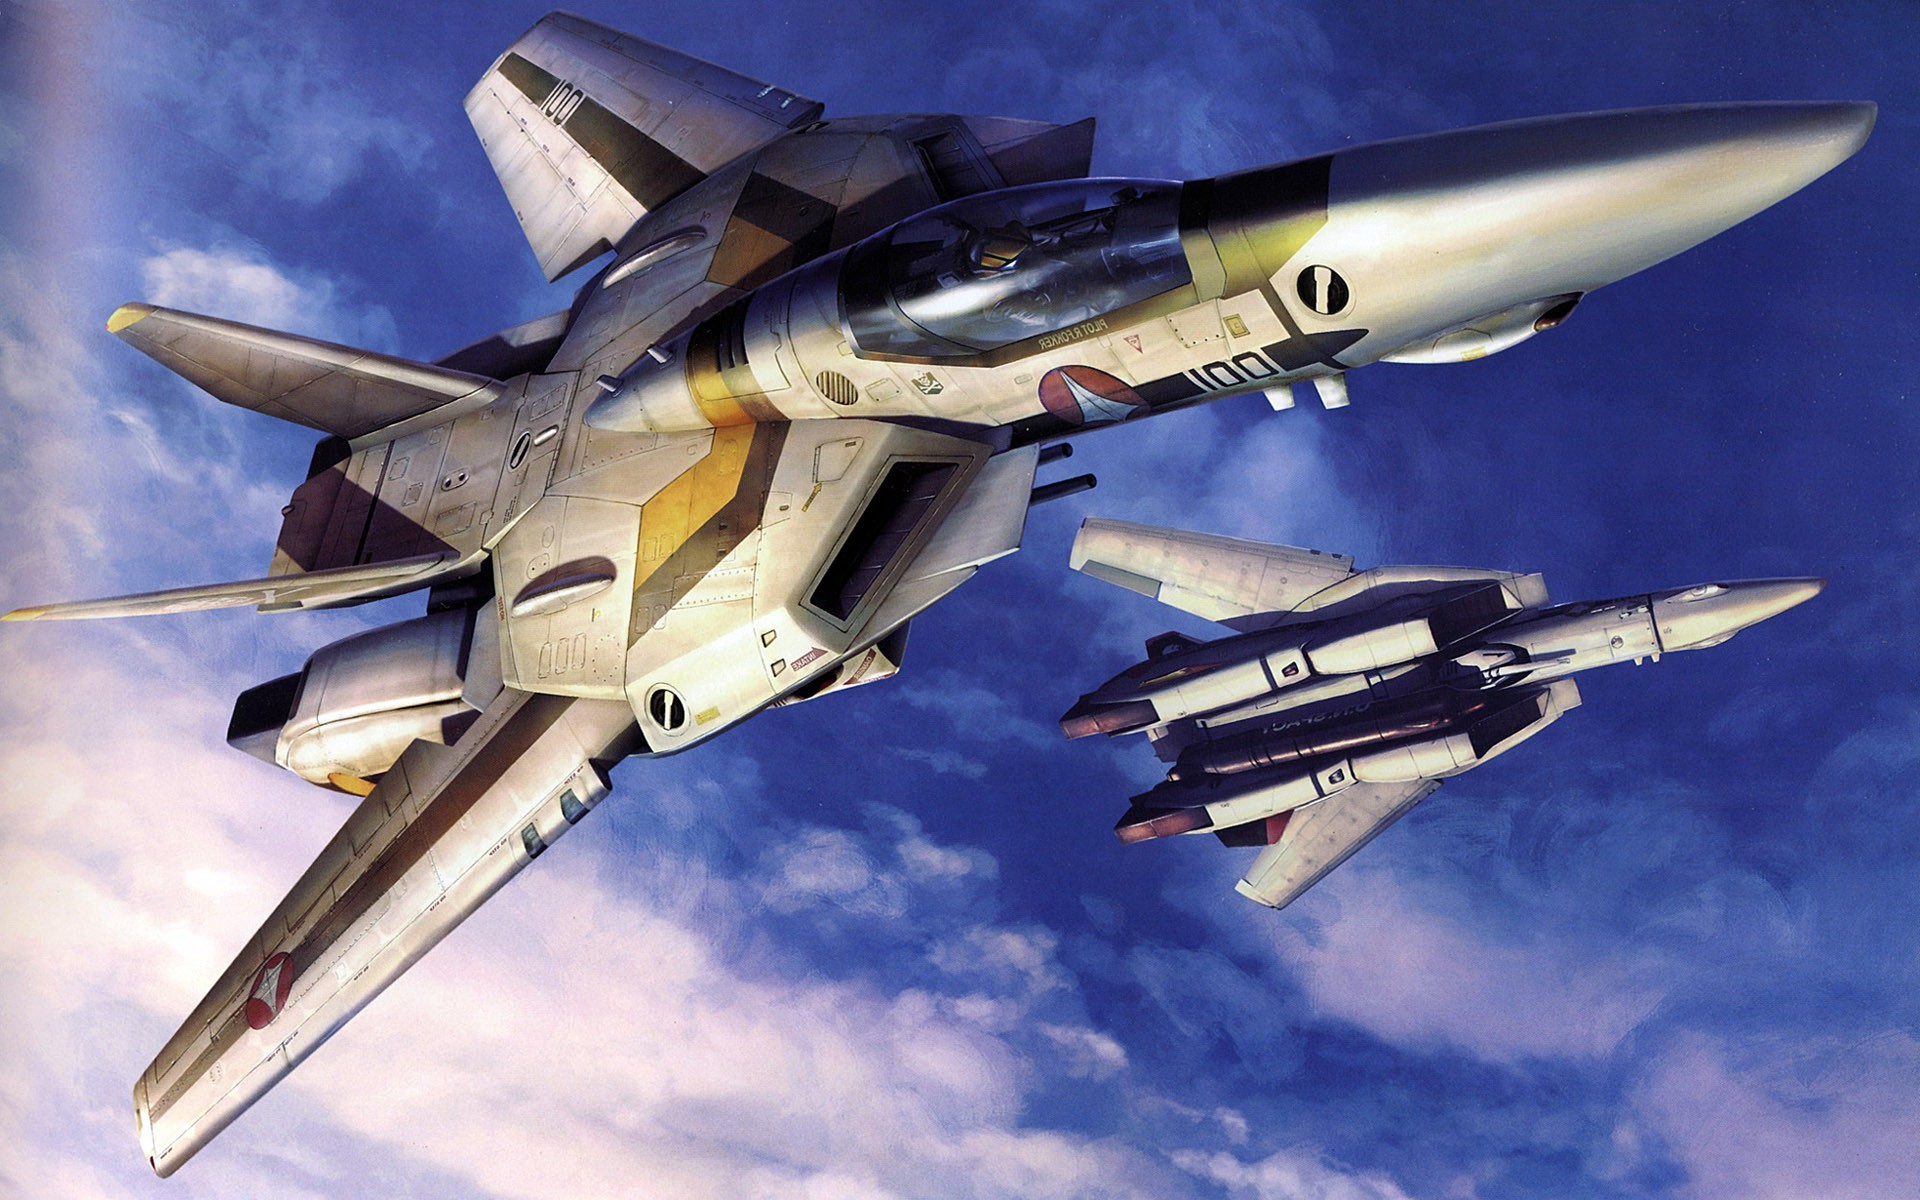 jet Fighter, Military Aircraft, Military, Airplane, Macross Wallpaper